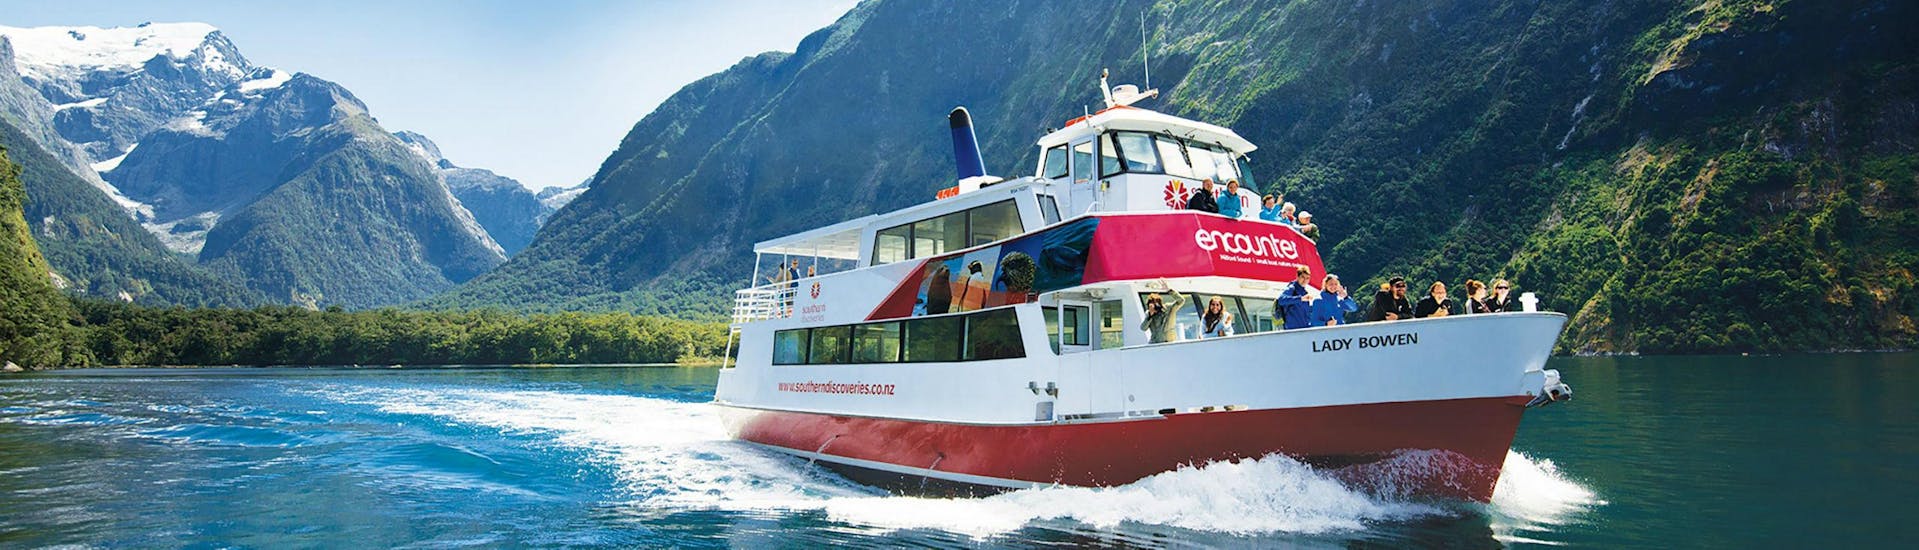 One of the Southern Discoveries ships is cruising along New Zealand's most famous fjord during the Encounter Nature Cruise in Milford Sound - Winter.